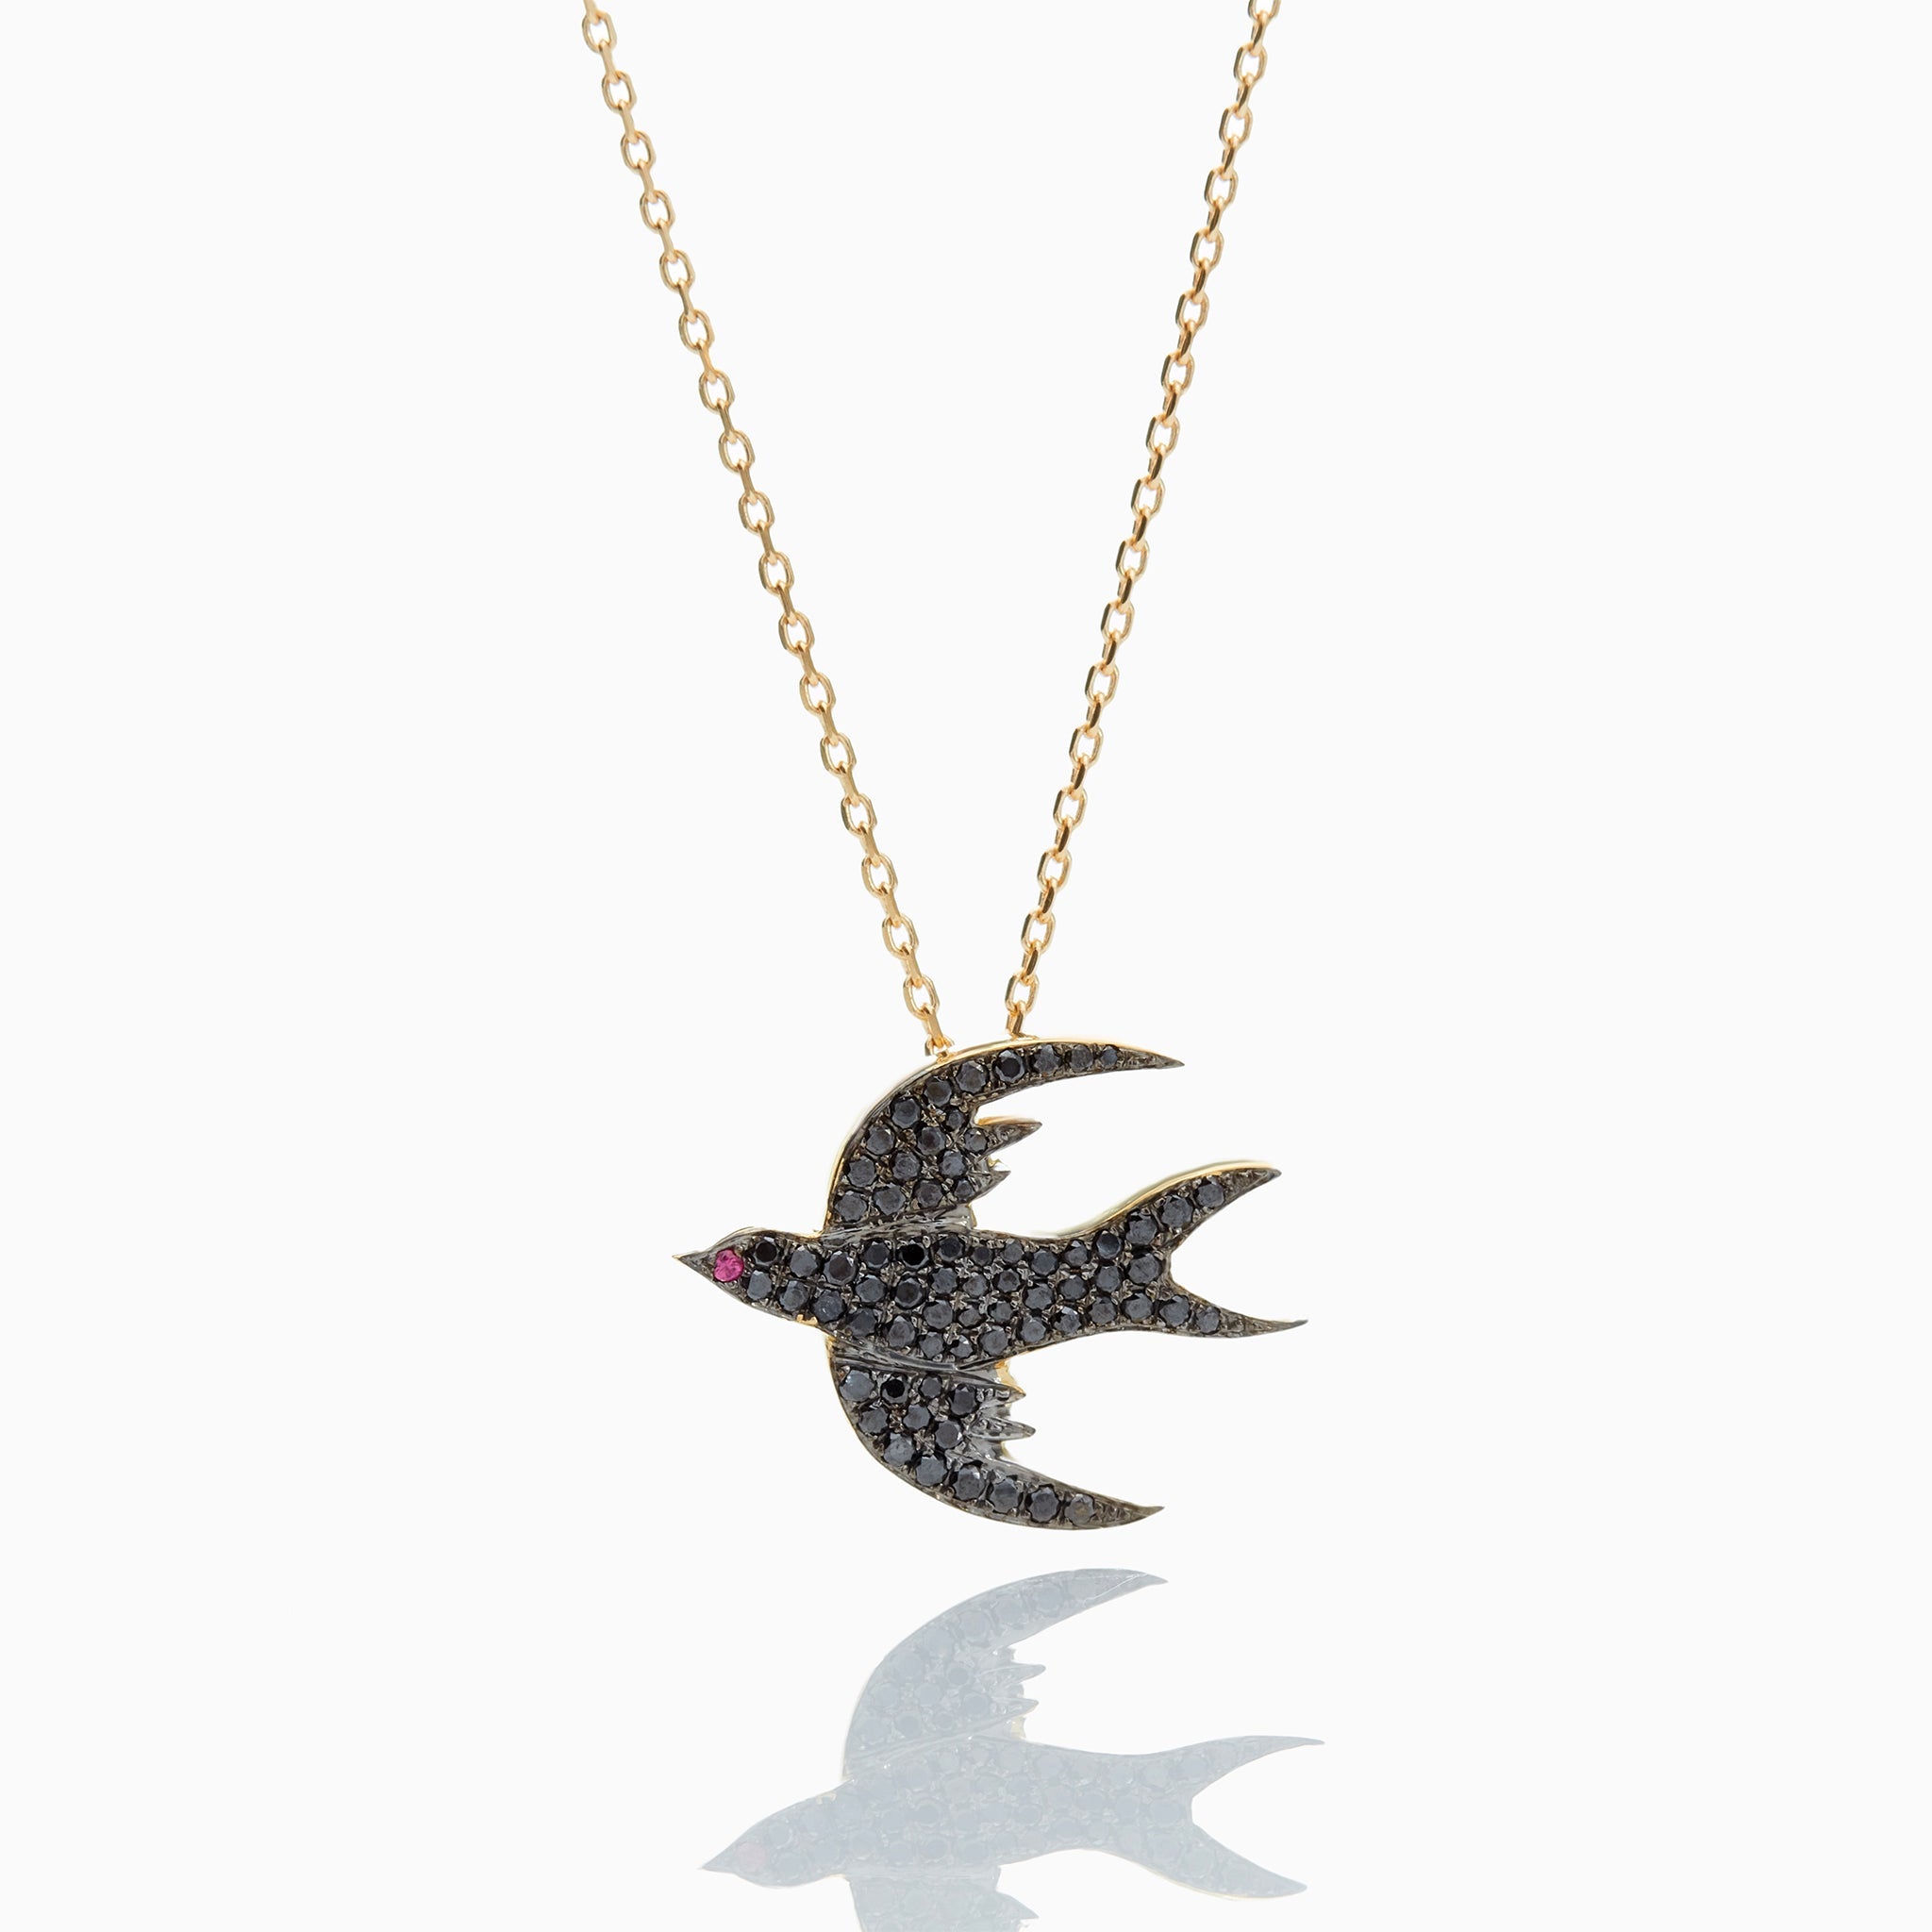 Buy 14k 18k Solid Gold Diamond Bird Necklace, Diamond Bird Pendant Necklace,  Dainty Gold Bird Necklace, Tweety Necklace is a Great Gift for Her Online  in India - Etsy